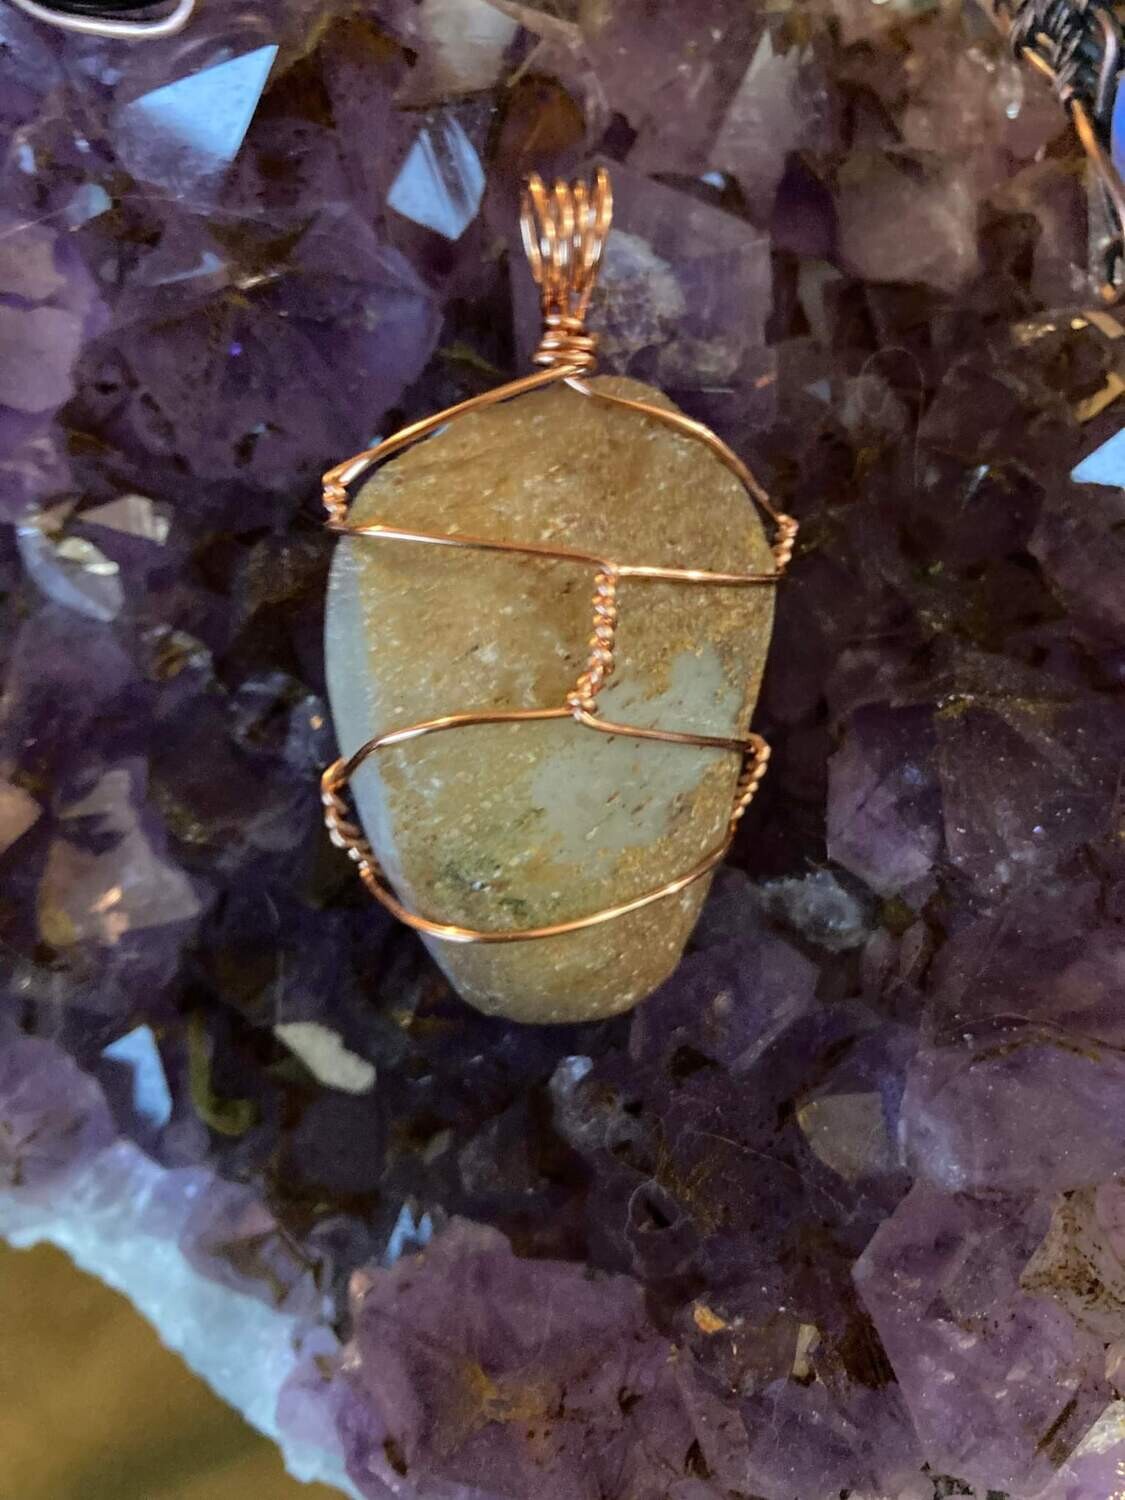 Wire Wrapping Class Basic -April 23rd at 9:00am